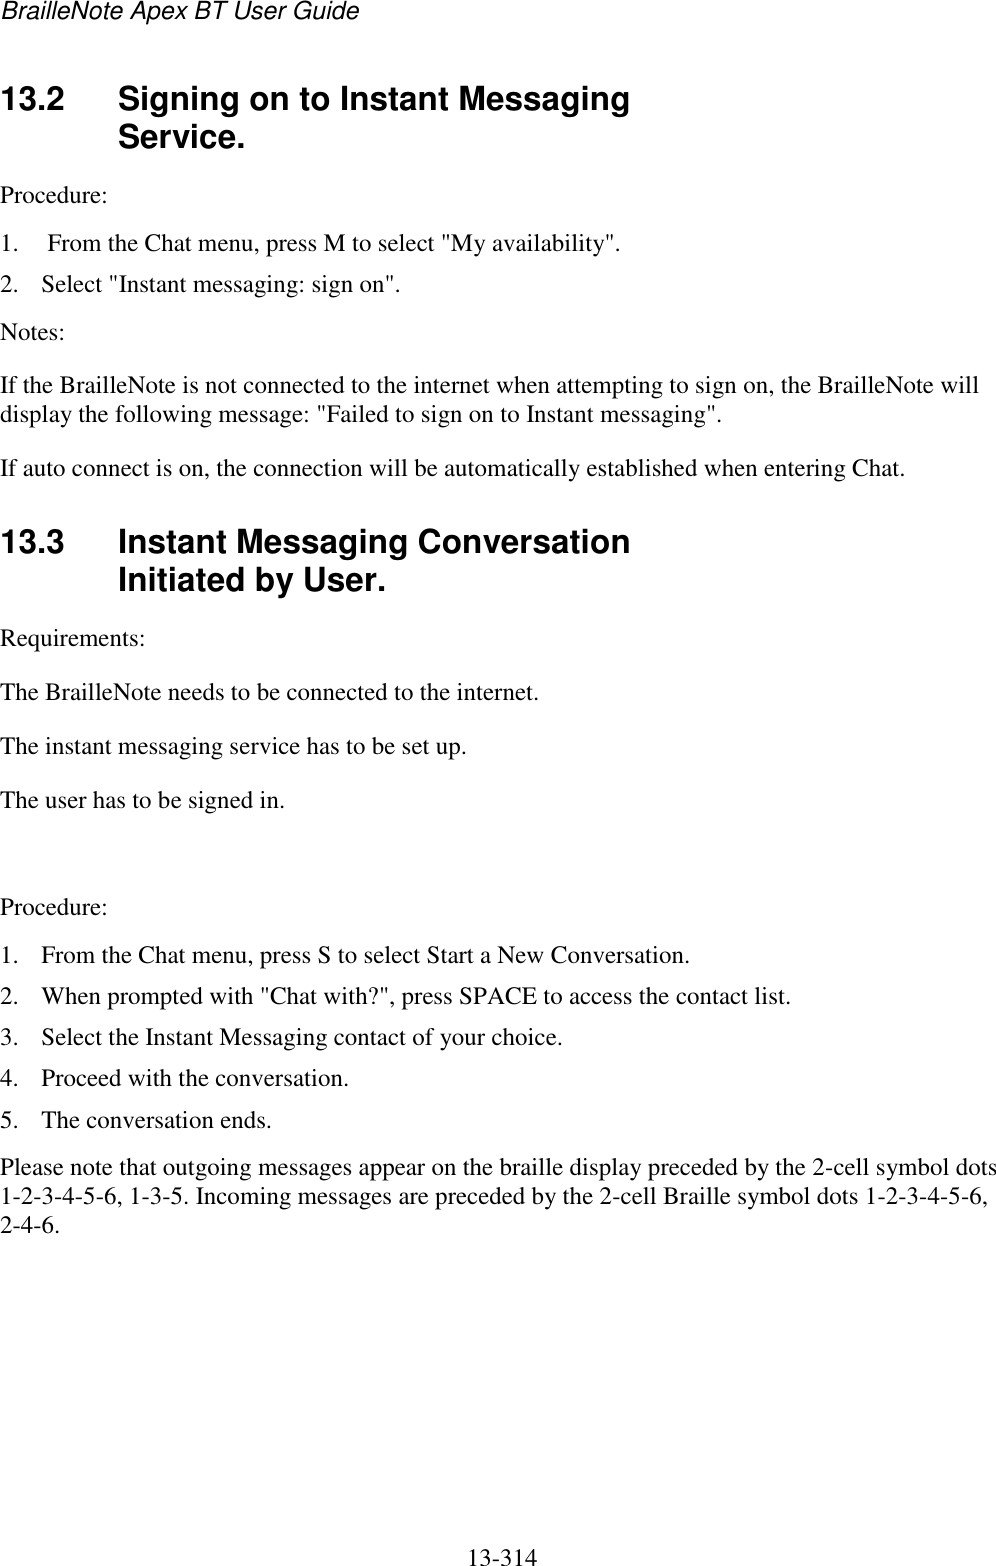 BrailleNote Apex BT User Guide   13-314   13.2  Signing on to Instant Messaging Service. Procedure: 1.  From the Chat menu, press M to select &quot;My availability&quot;.  2. Select &quot;Instant messaging: sign on&quot;.  Notes:  If the BrailleNote is not connected to the internet when attempting to sign on, the BrailleNote will display the following message: &quot;Failed to sign on to Instant messaging&quot;.  If auto connect is on, the connection will be automatically established when entering Chat.  13.3  Instant Messaging Conversation Initiated by User. Requirements:  The BrailleNote needs to be connected to the internet.  The instant messaging service has to be set up. The user has to be signed in.   Procedure:  1. From the Chat menu, press S to select Start a New Conversation. 2. When prompted with &quot;Chat with?&quot;, press SPACE to access the contact list.  3. Select the Instant Messaging contact of your choice.  4. Proceed with the conversation. 5. The conversation ends. Please note that outgoing messages appear on the braille display preceded by the 2-cell symbol dots 1-2-3-4-5-6, 1-3-5. Incoming messages are preceded by the 2-cell Braille symbol dots 1-2-3-4-5-6, 2-4-6.  